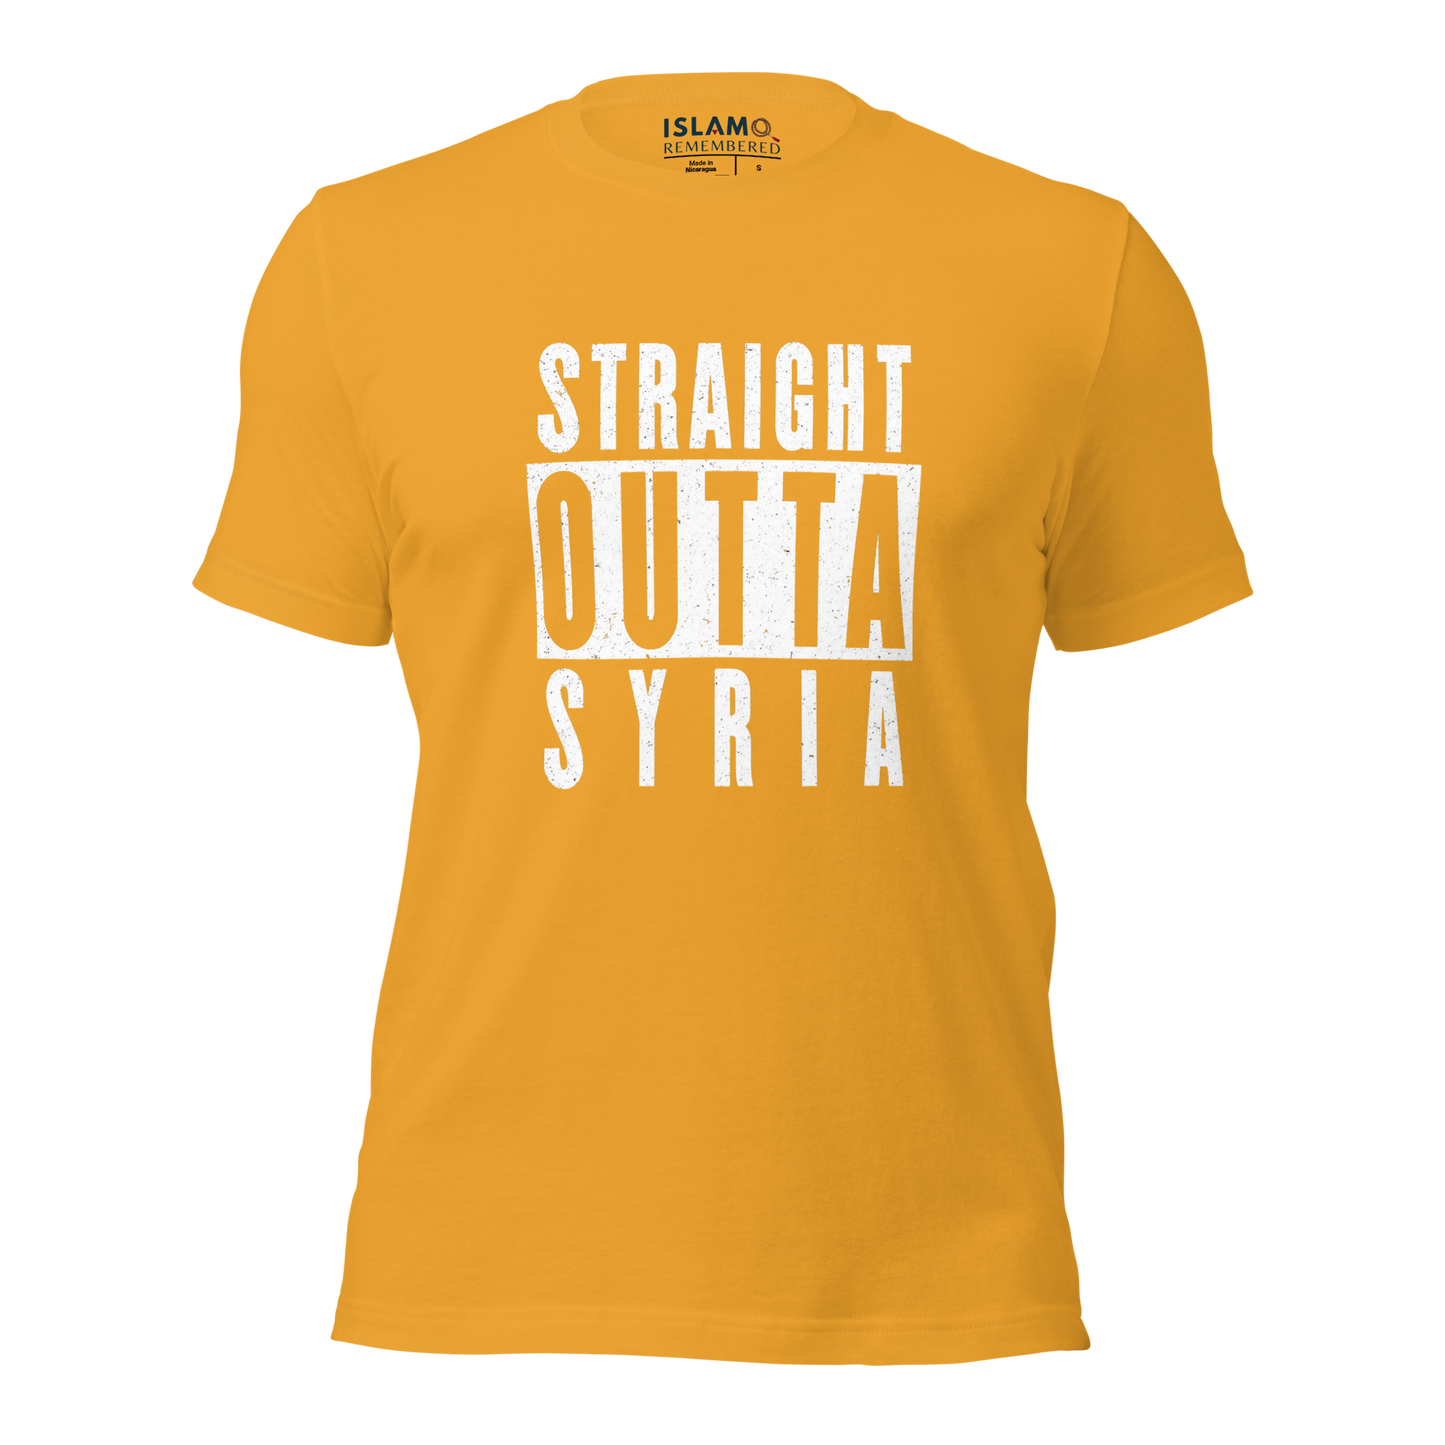 ADULT T-Shirt - STRAIGHT OUTTA SYRIA